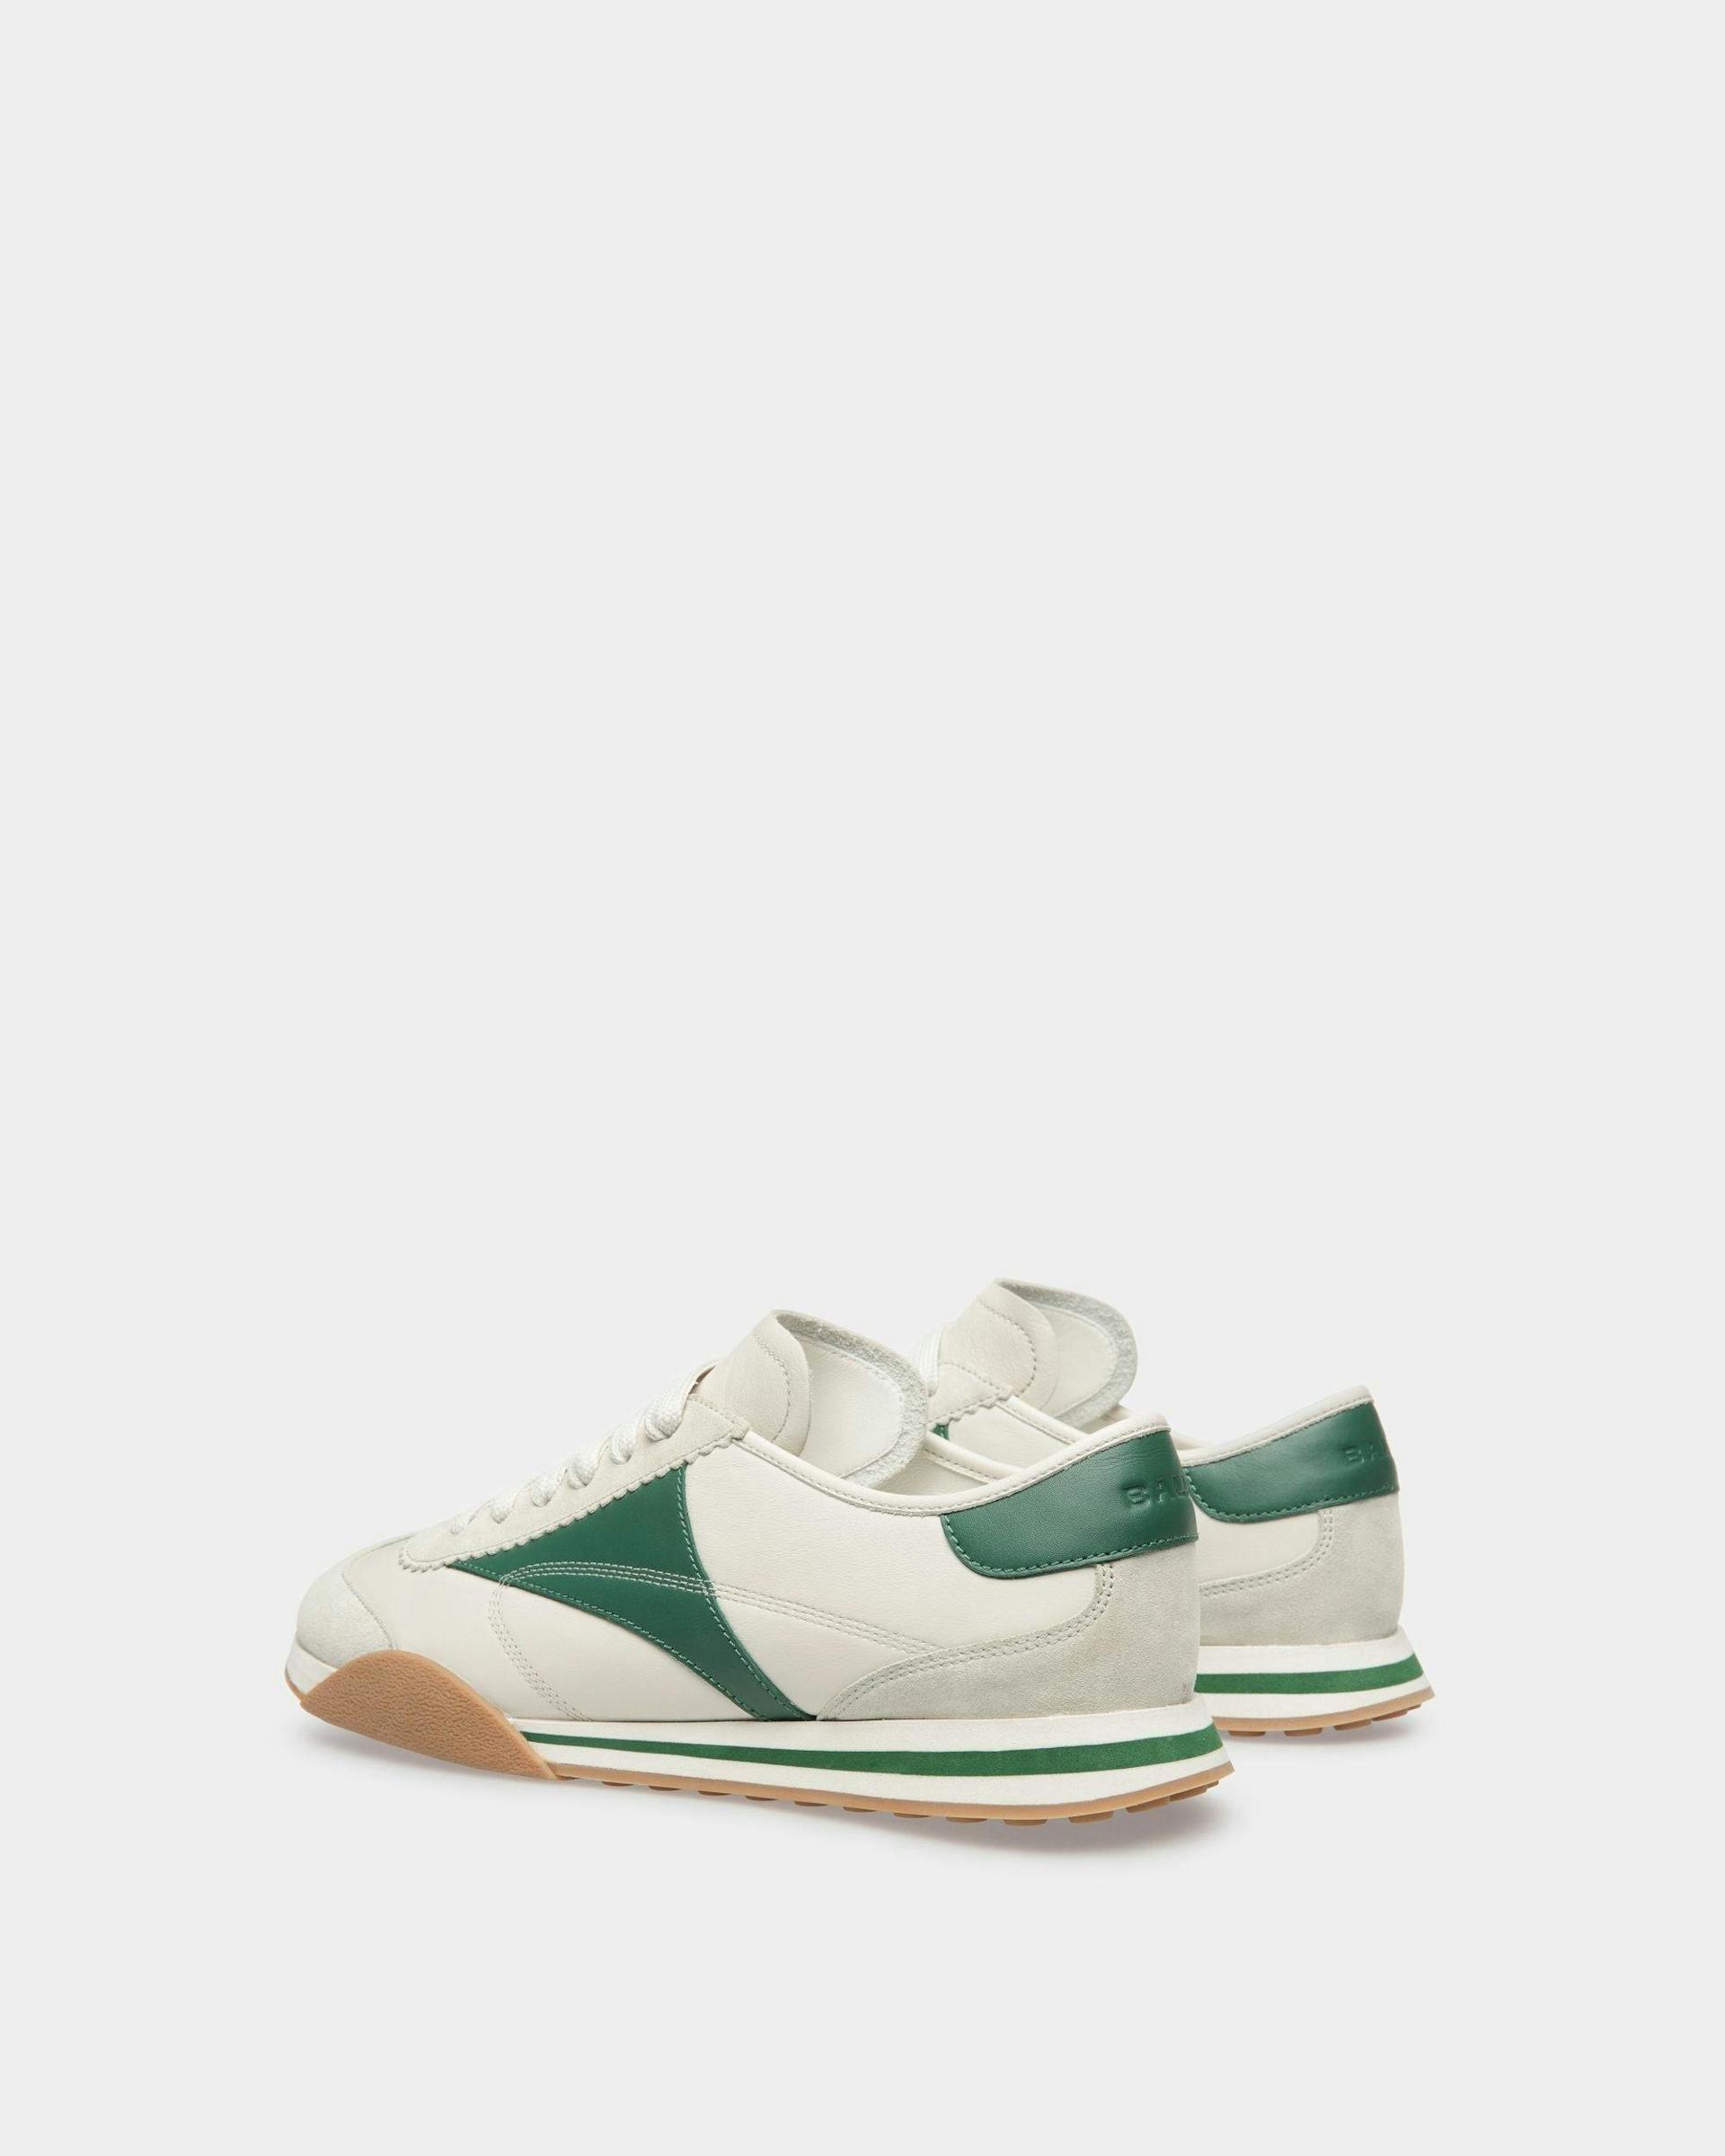 Sussex Sneakers In Dusty White And Kelly Green Leather - Men's - Bally - 04